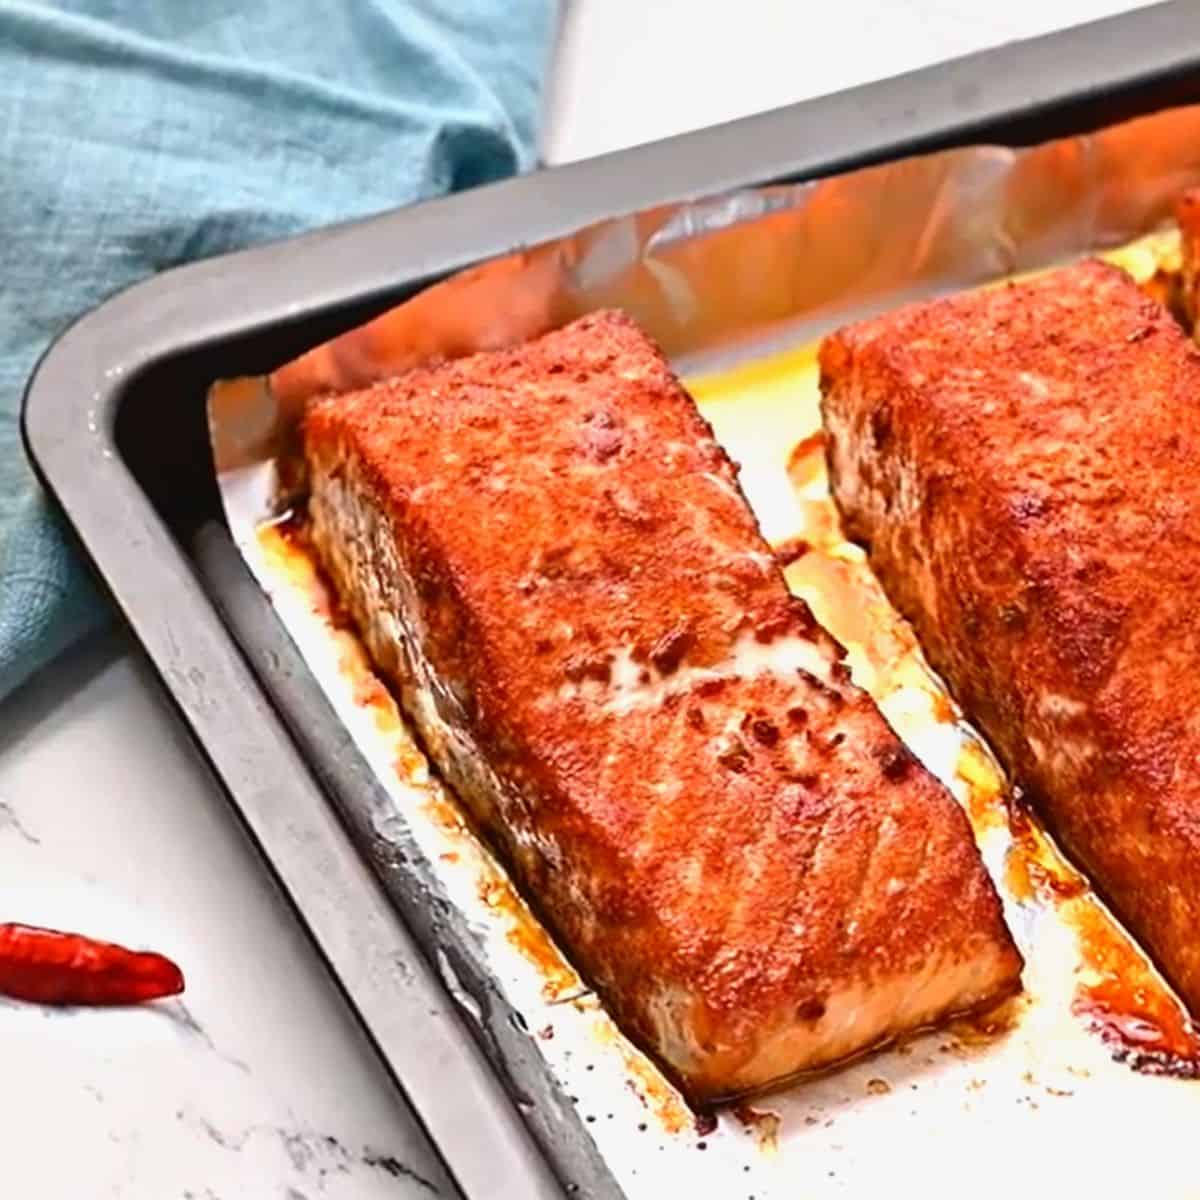 Baked spice rubbed salmon on baking sheet.